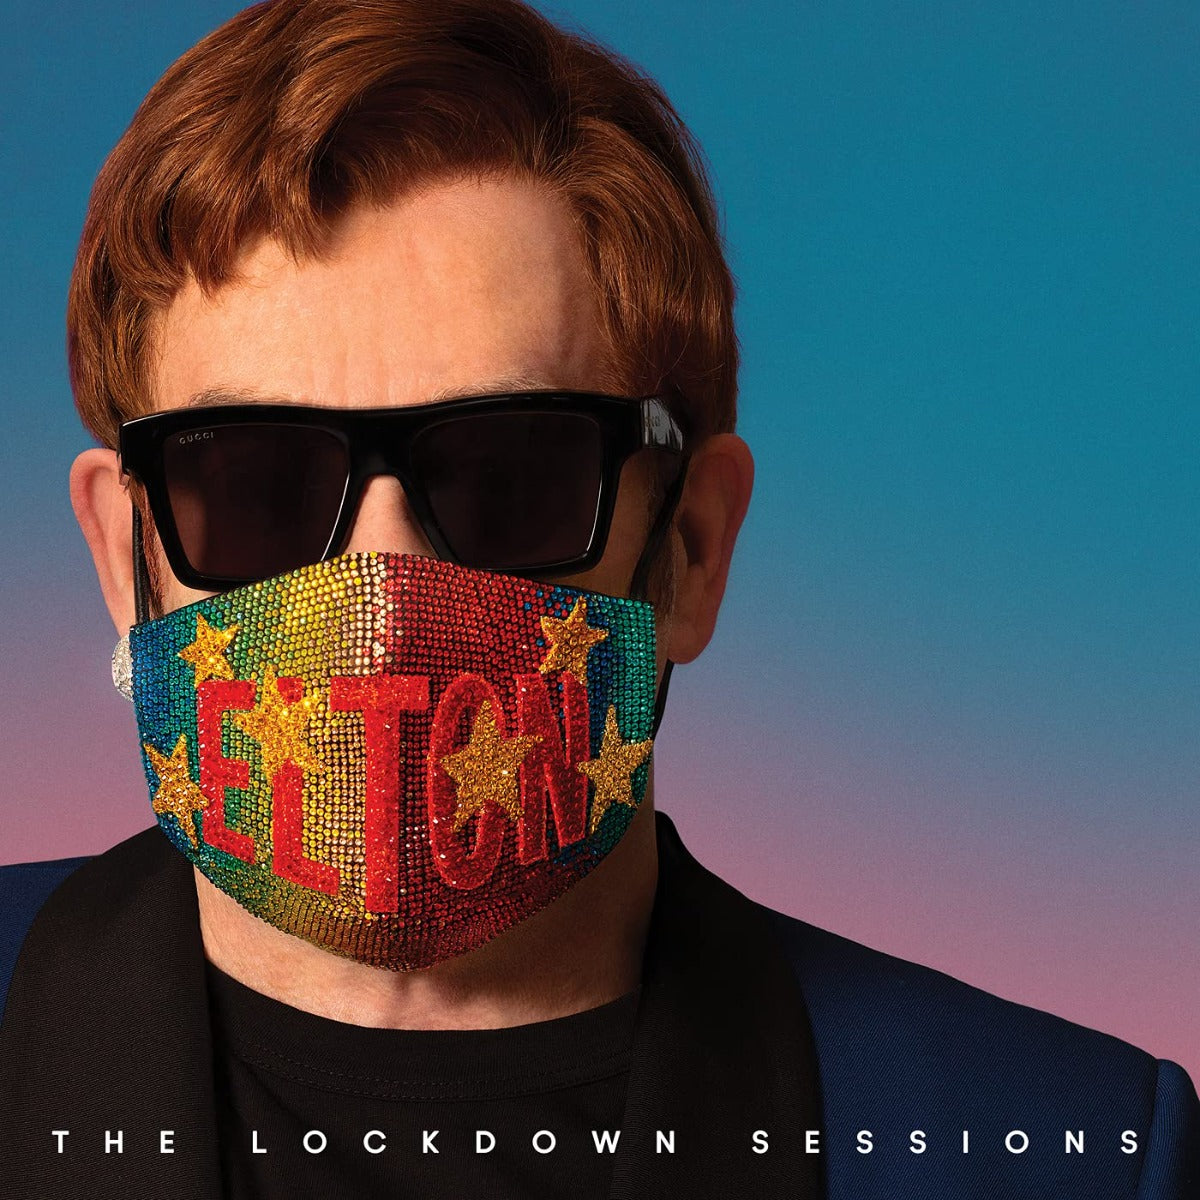 The Lockdown Sessions (Limited Edition, Blue Vinyl) (2 Lp's)